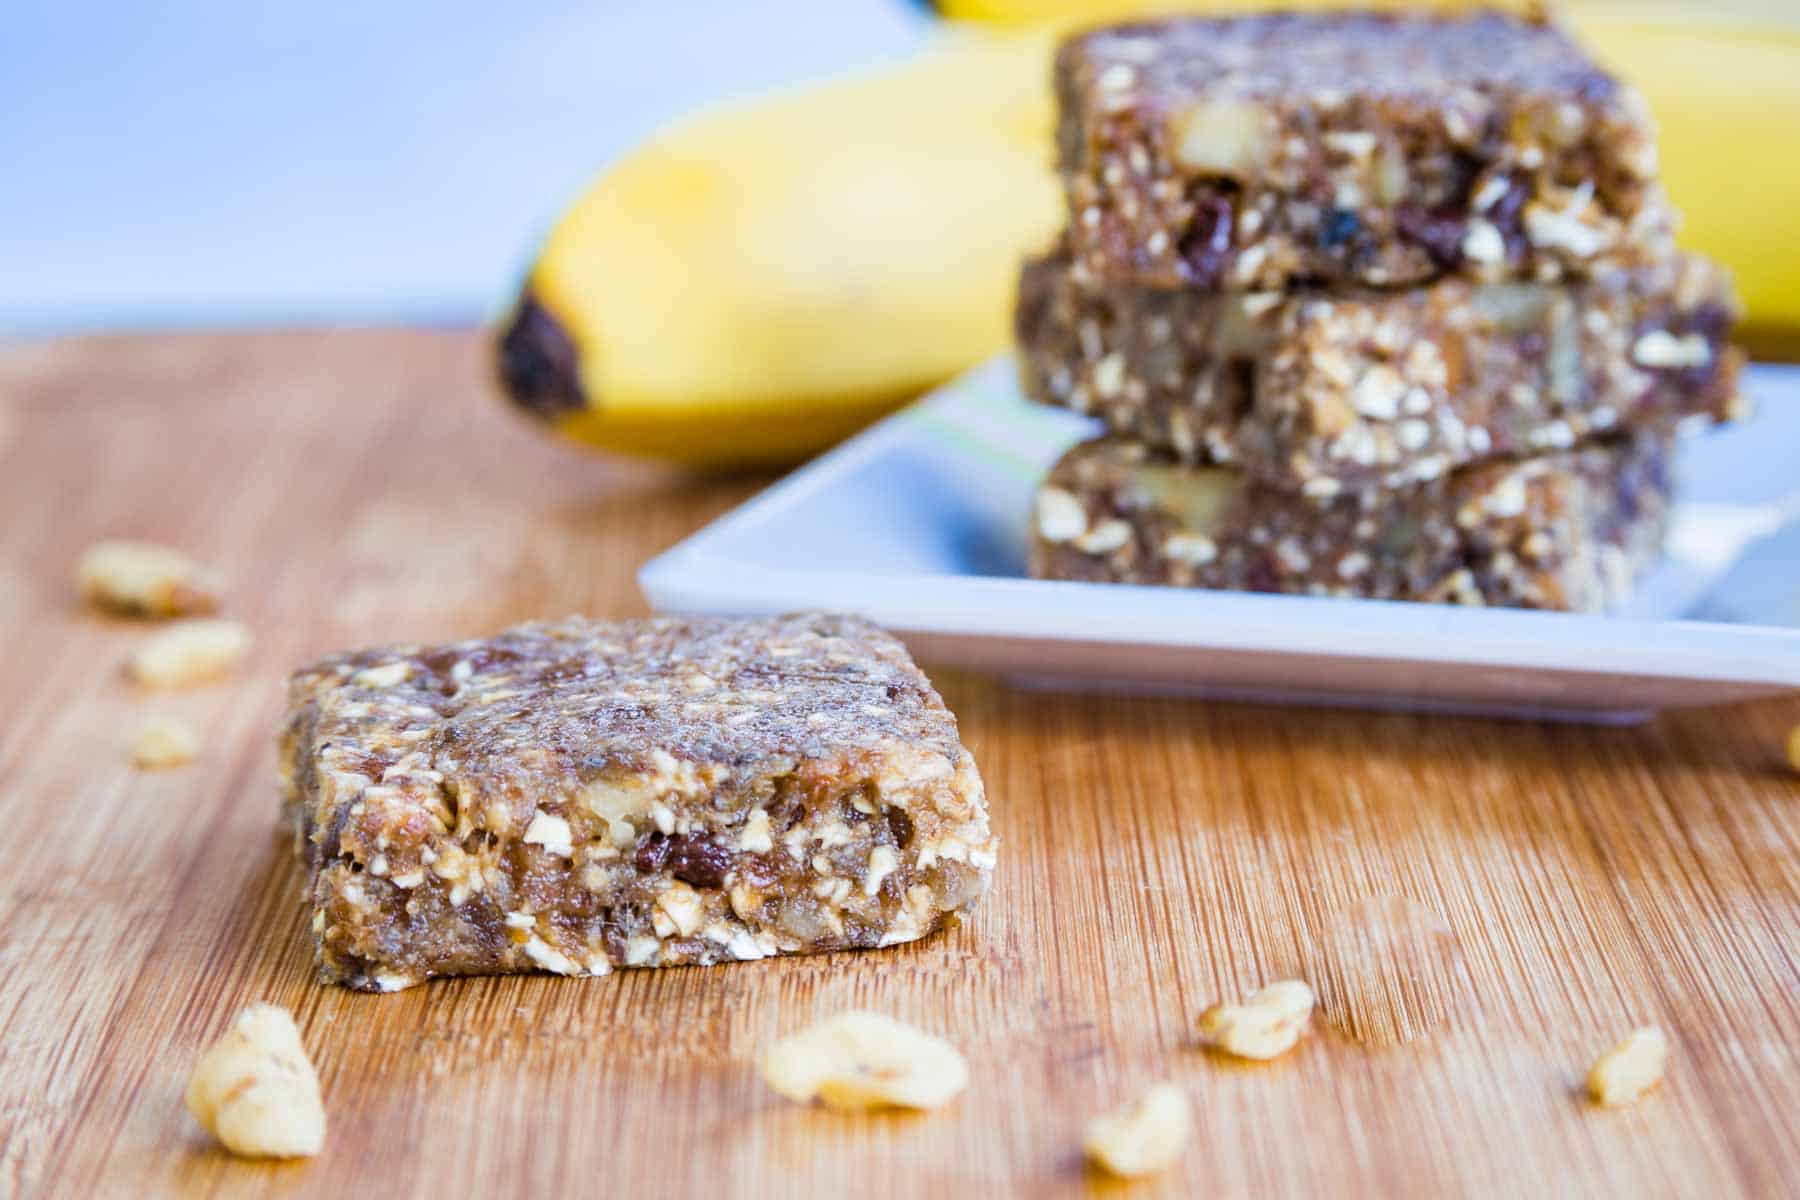 A Banana Nut Bar on a cutting board with walnuts around it and a plate of more bars and bananas in the background.